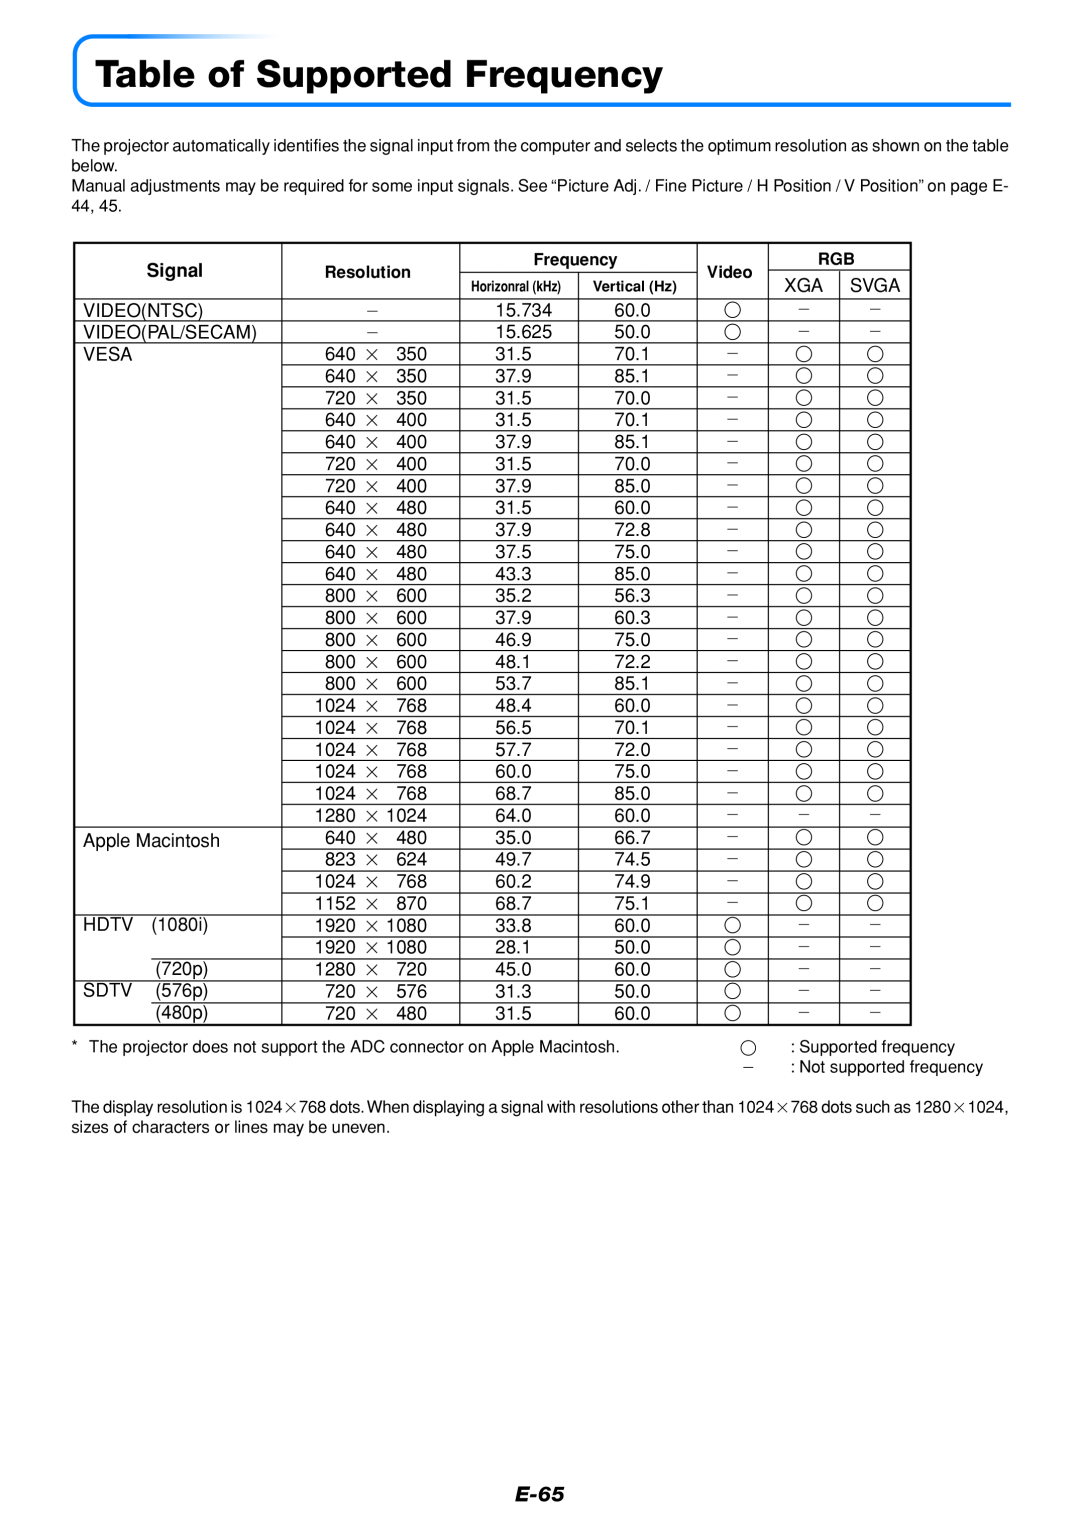 Mitsubishi Electronics DATA PROJECTOR user manual Table of Supported Frequency, E-65, Signal 